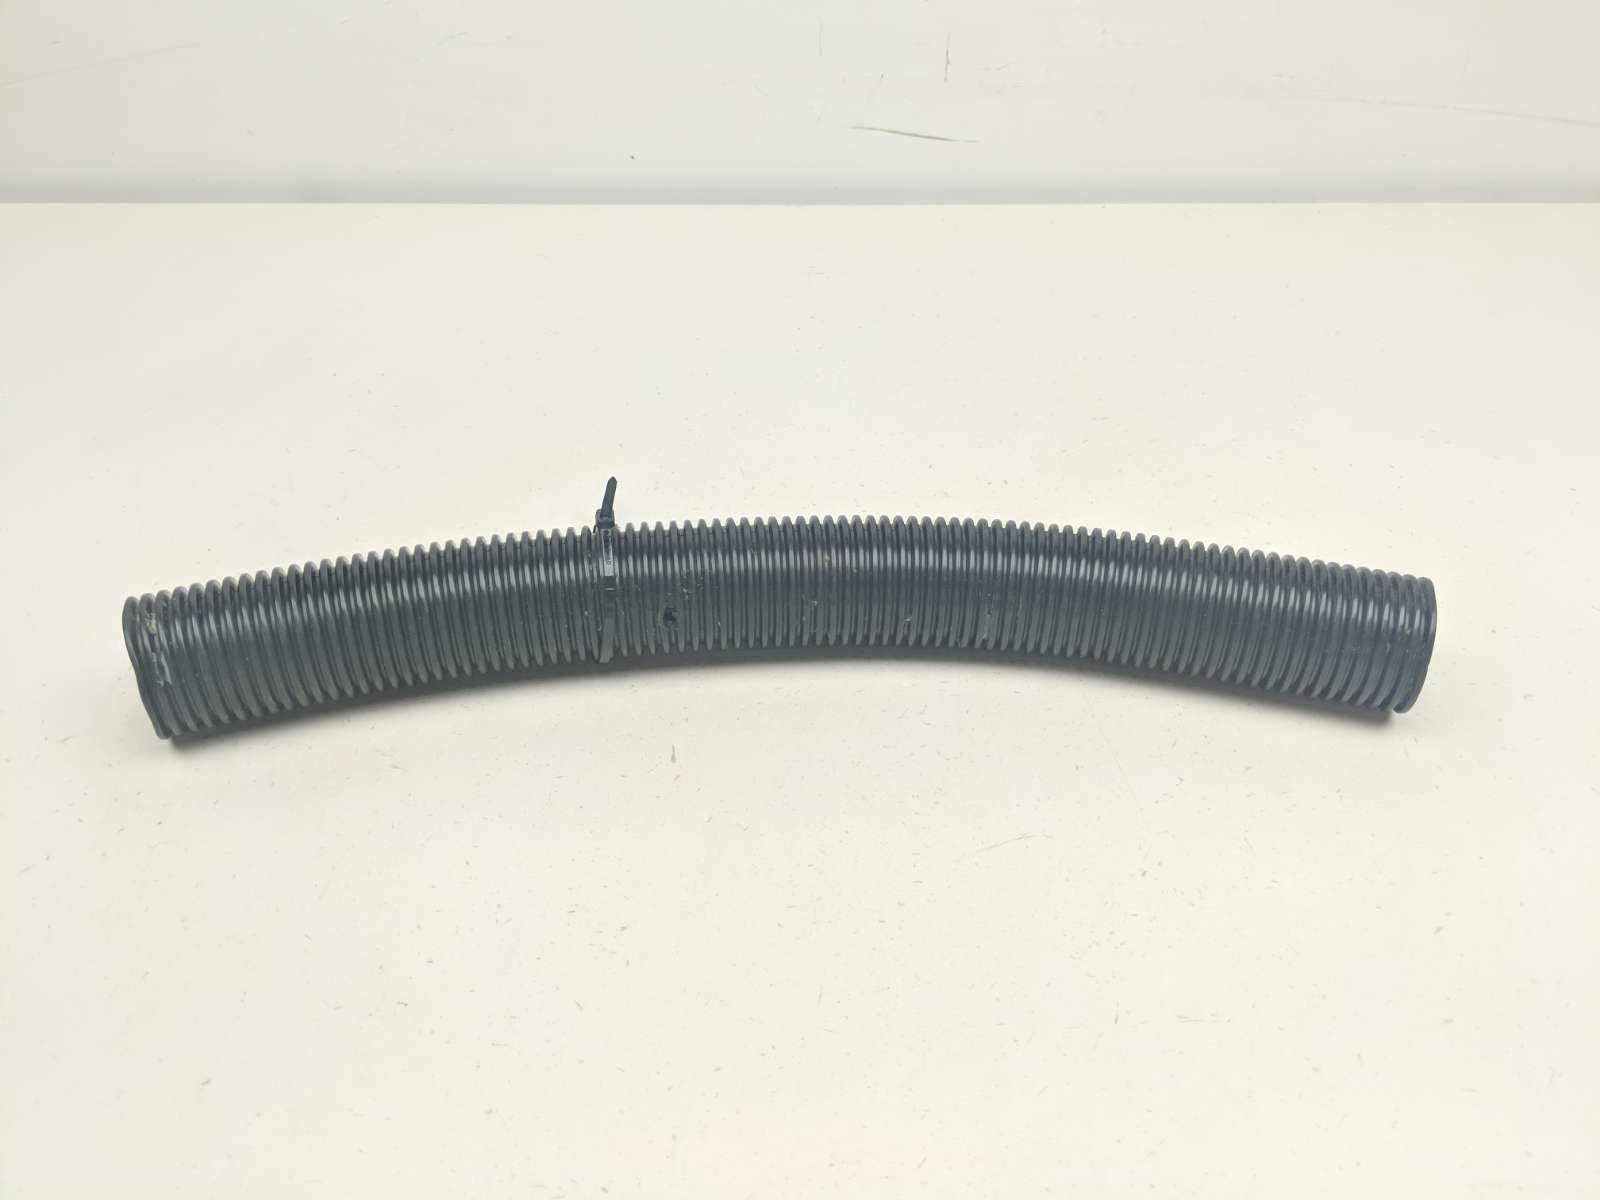 05 Kawasaki Brute Force 750 Front Coolant Tube Hose Duct Pipe